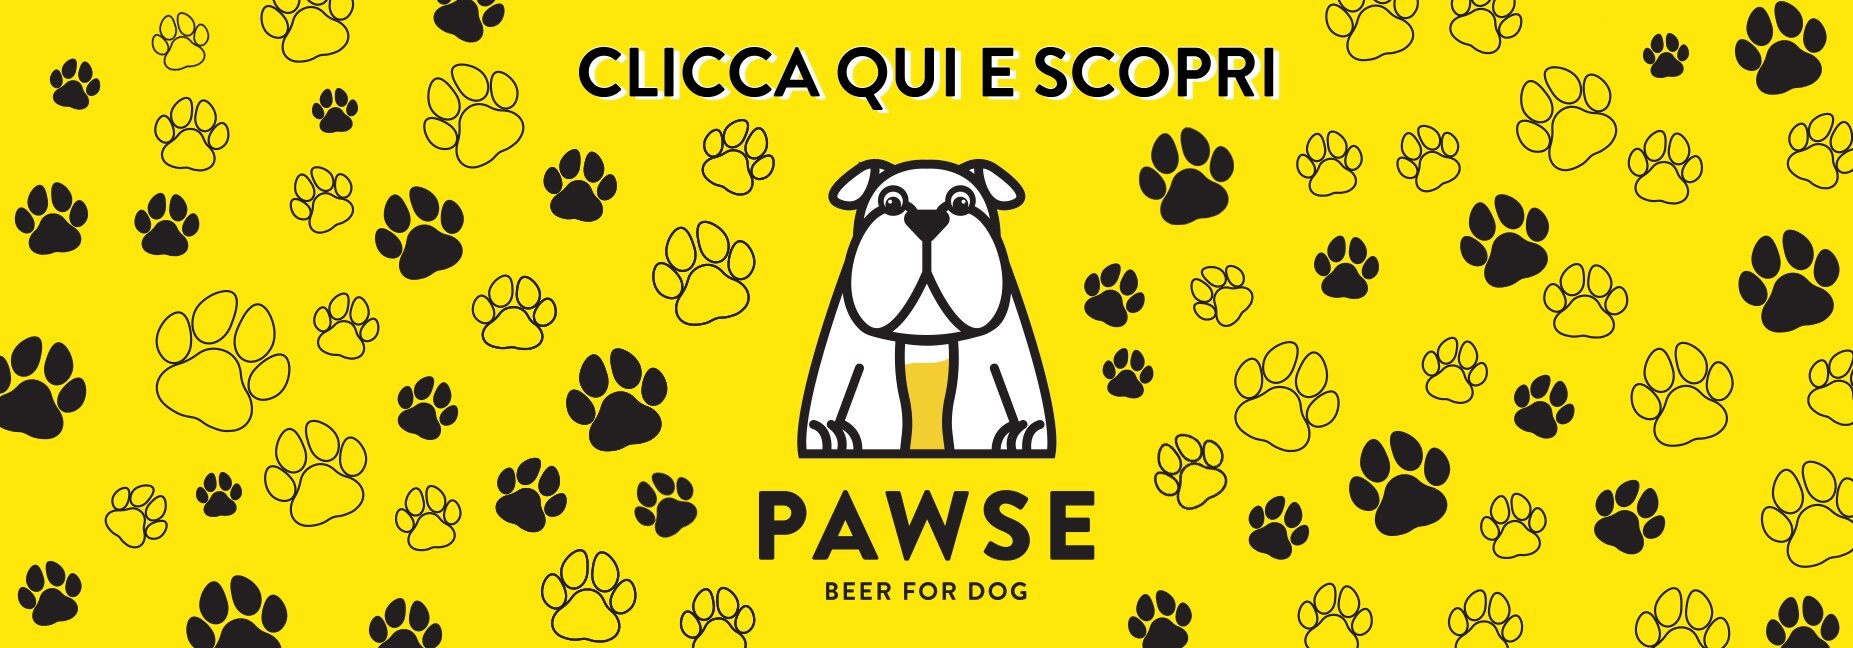 Pawse - Beer for dogs